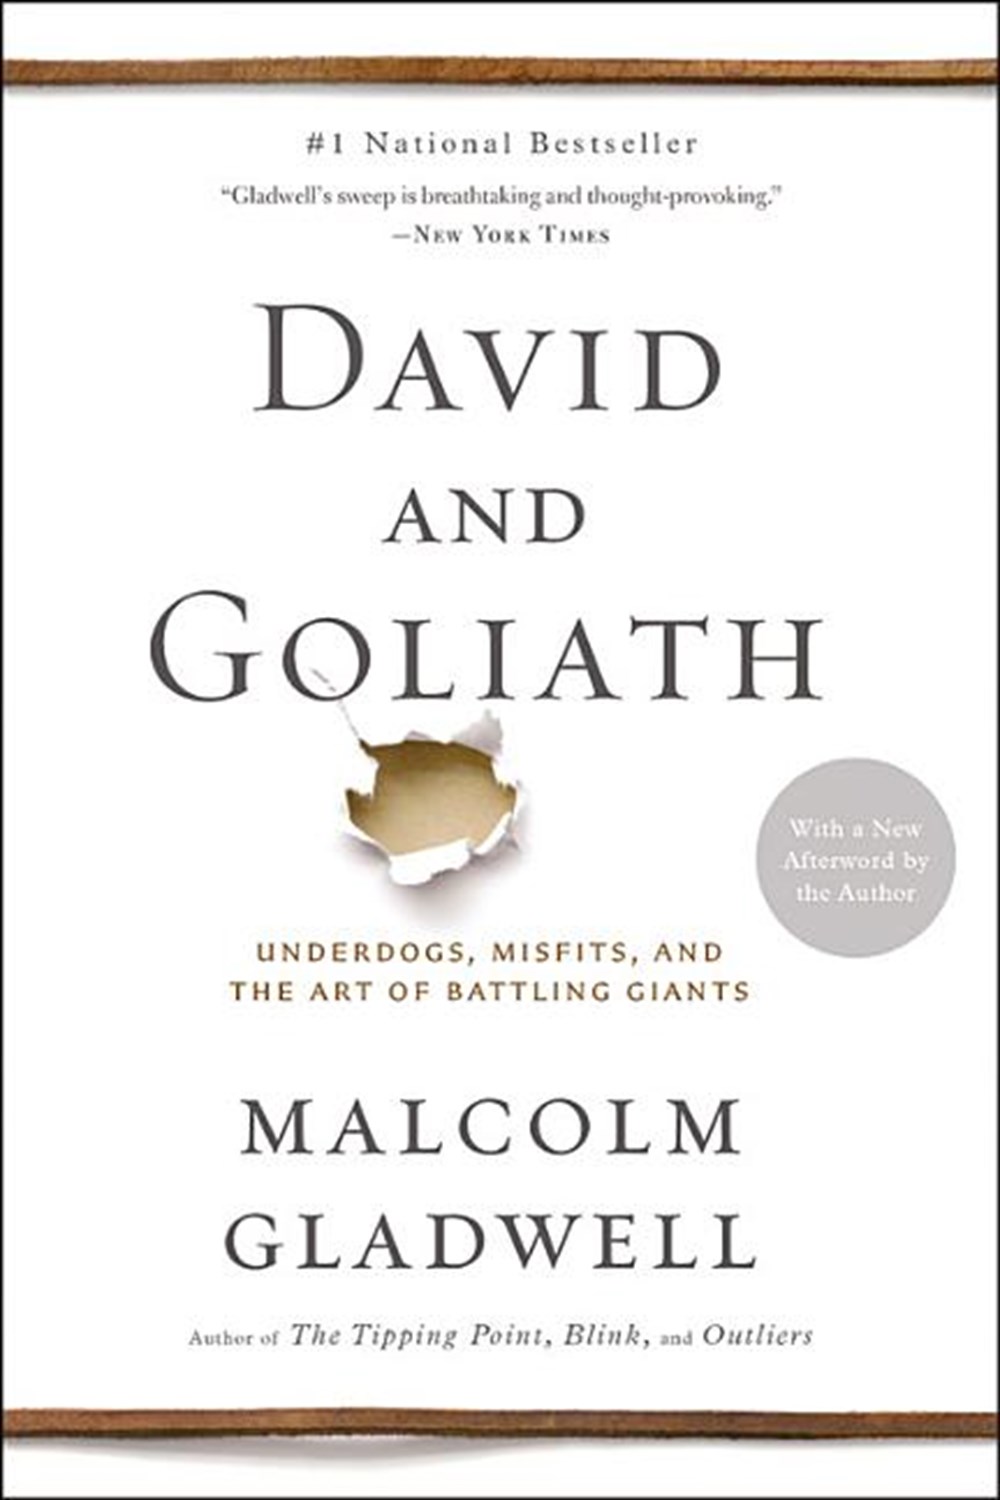 David and Goliath Underdogs, Misfits, and the Art of Battling Giants